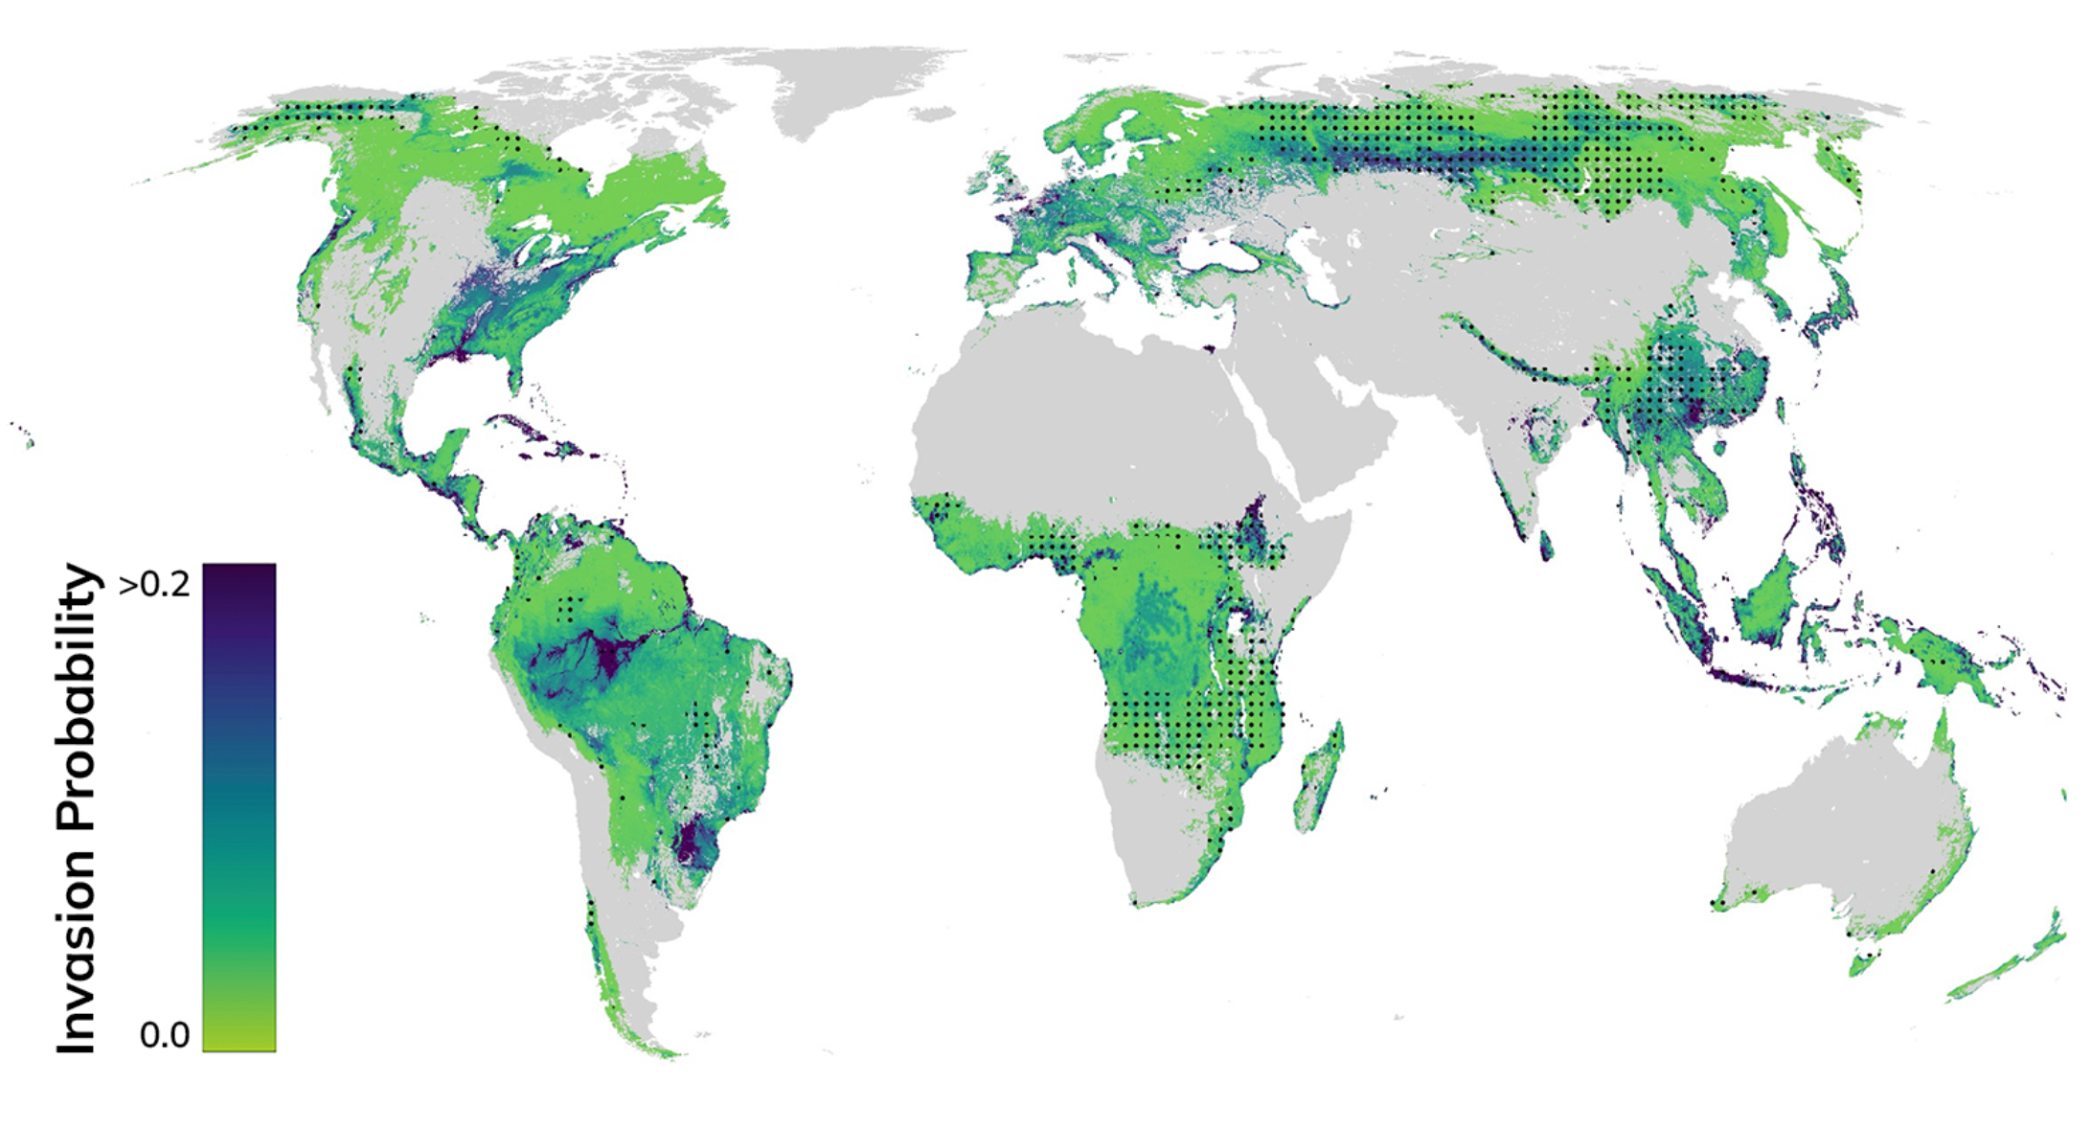 World map showing the probability of presence of non-native trees